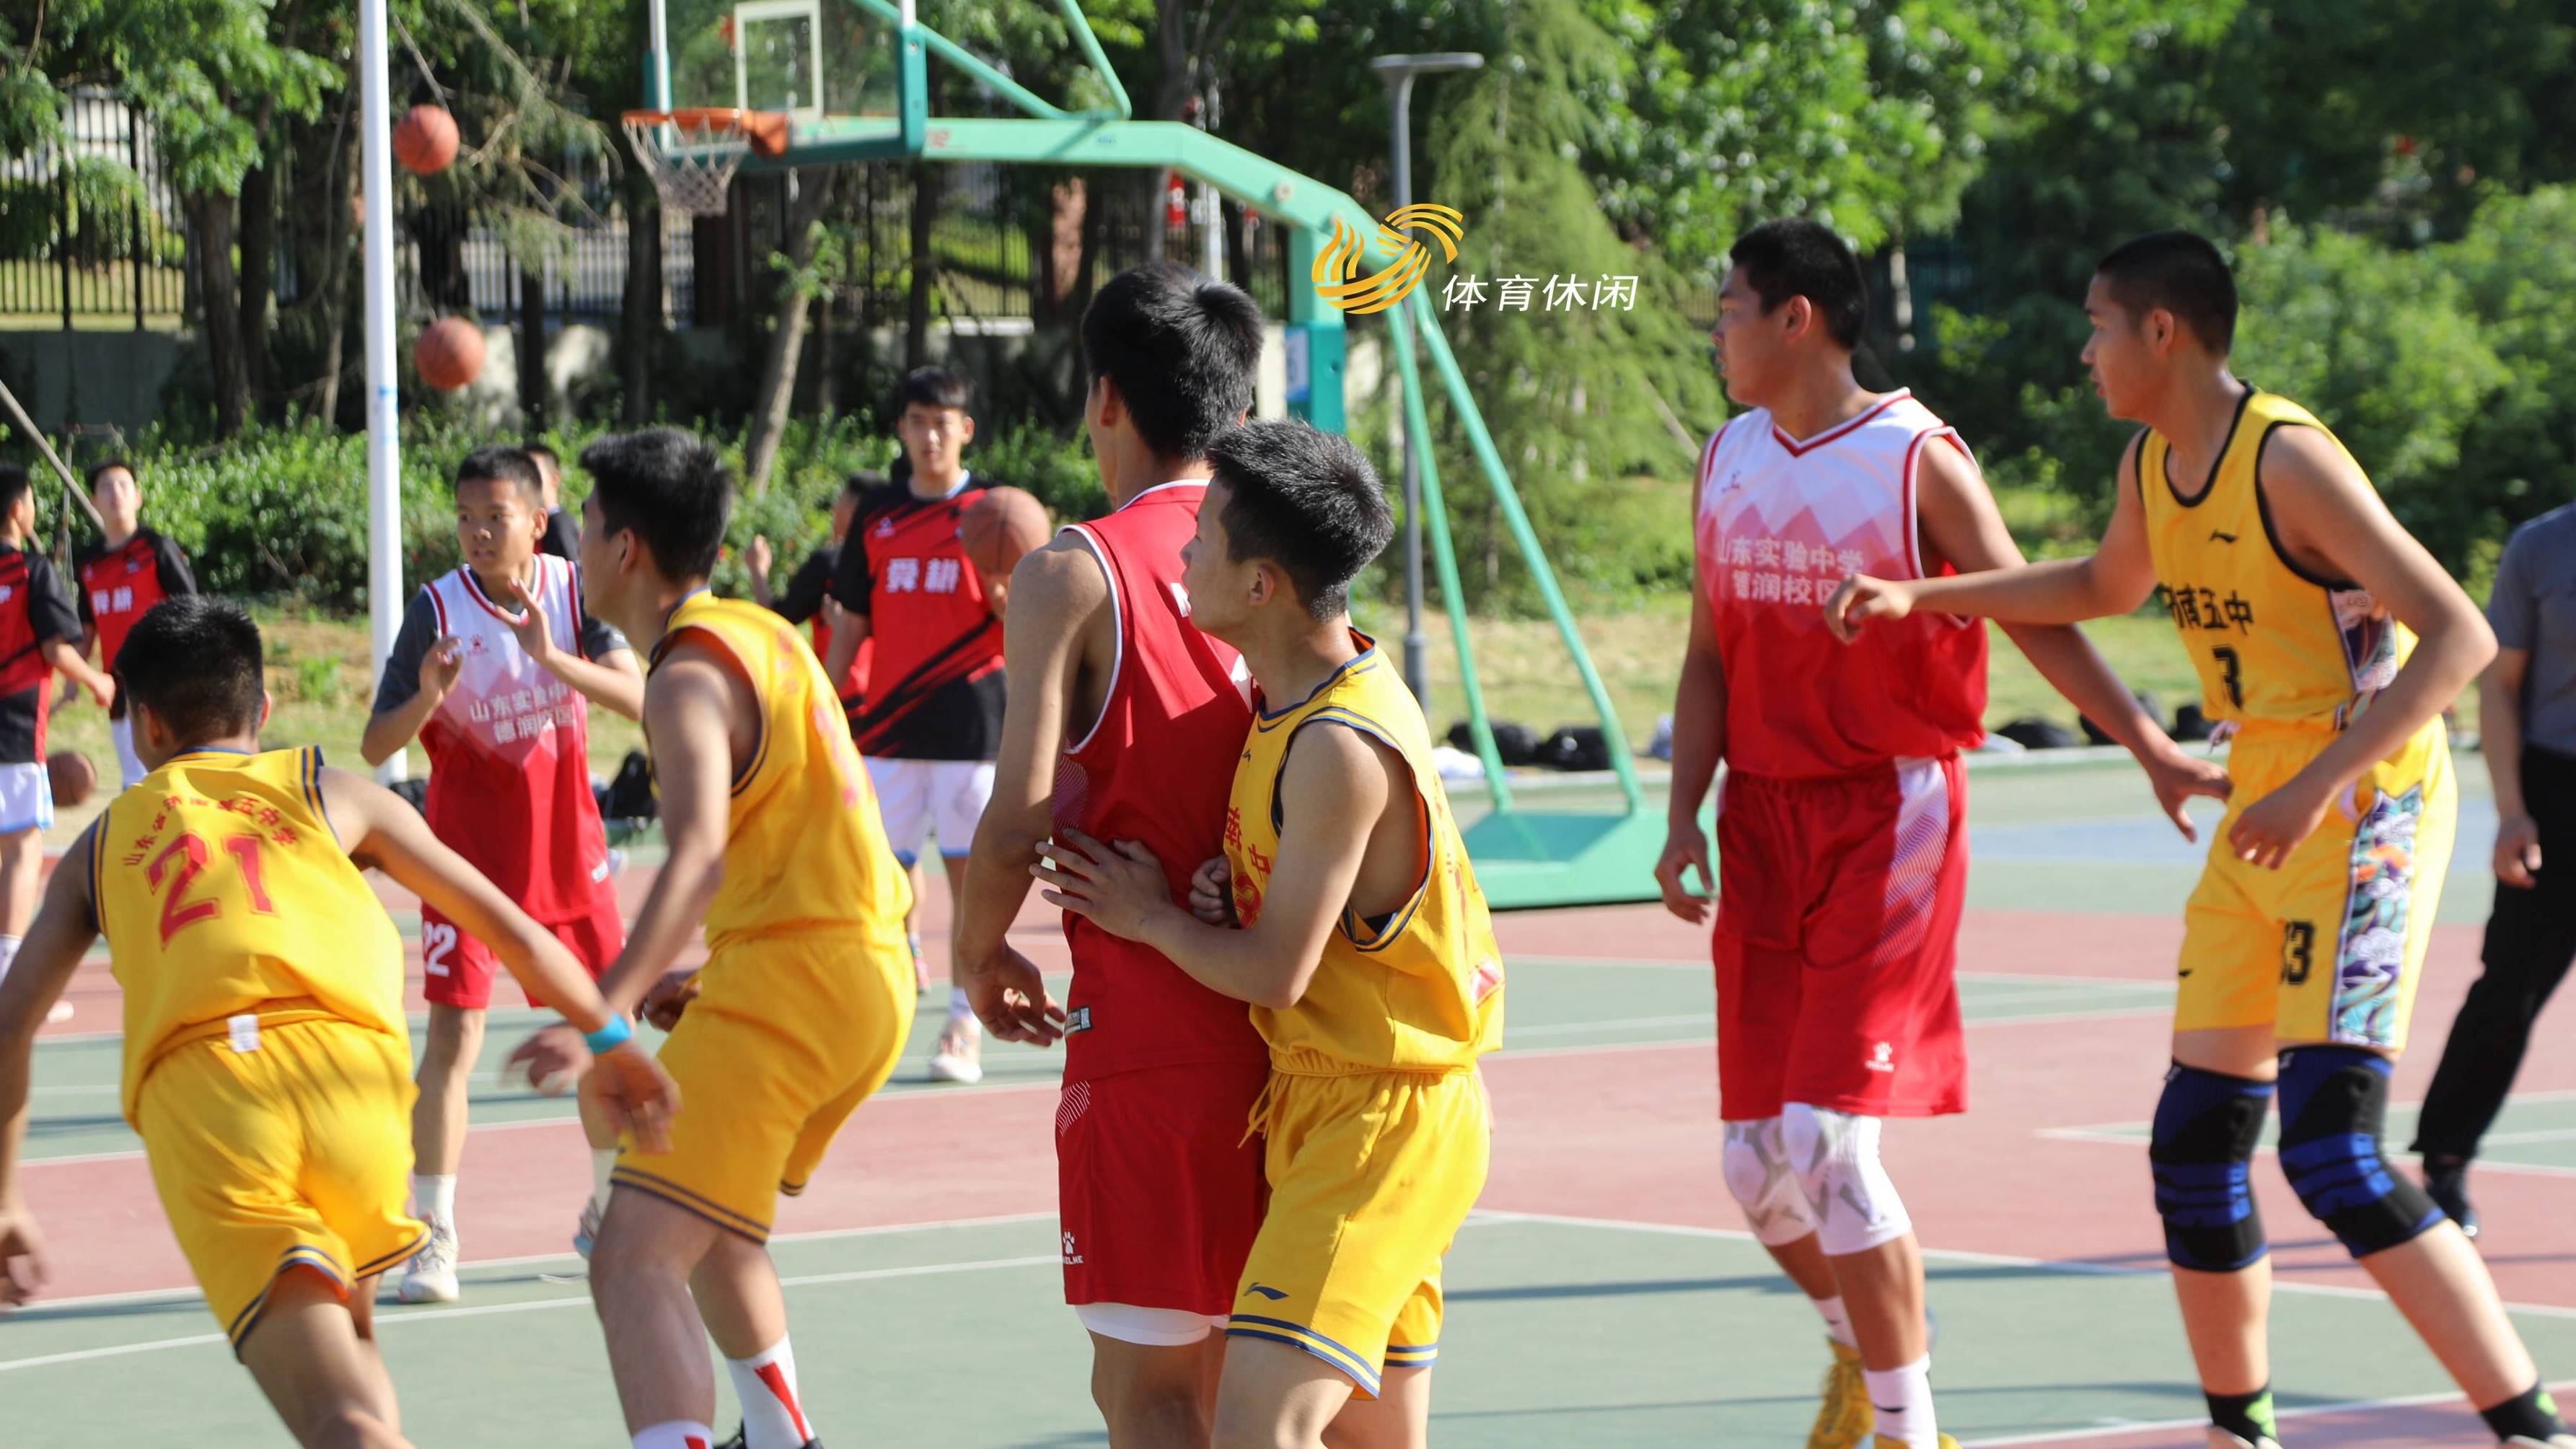  Shungeng Middle School won two consecutive victories in the second round of the top four round robin of Jinan Campus Basketball League